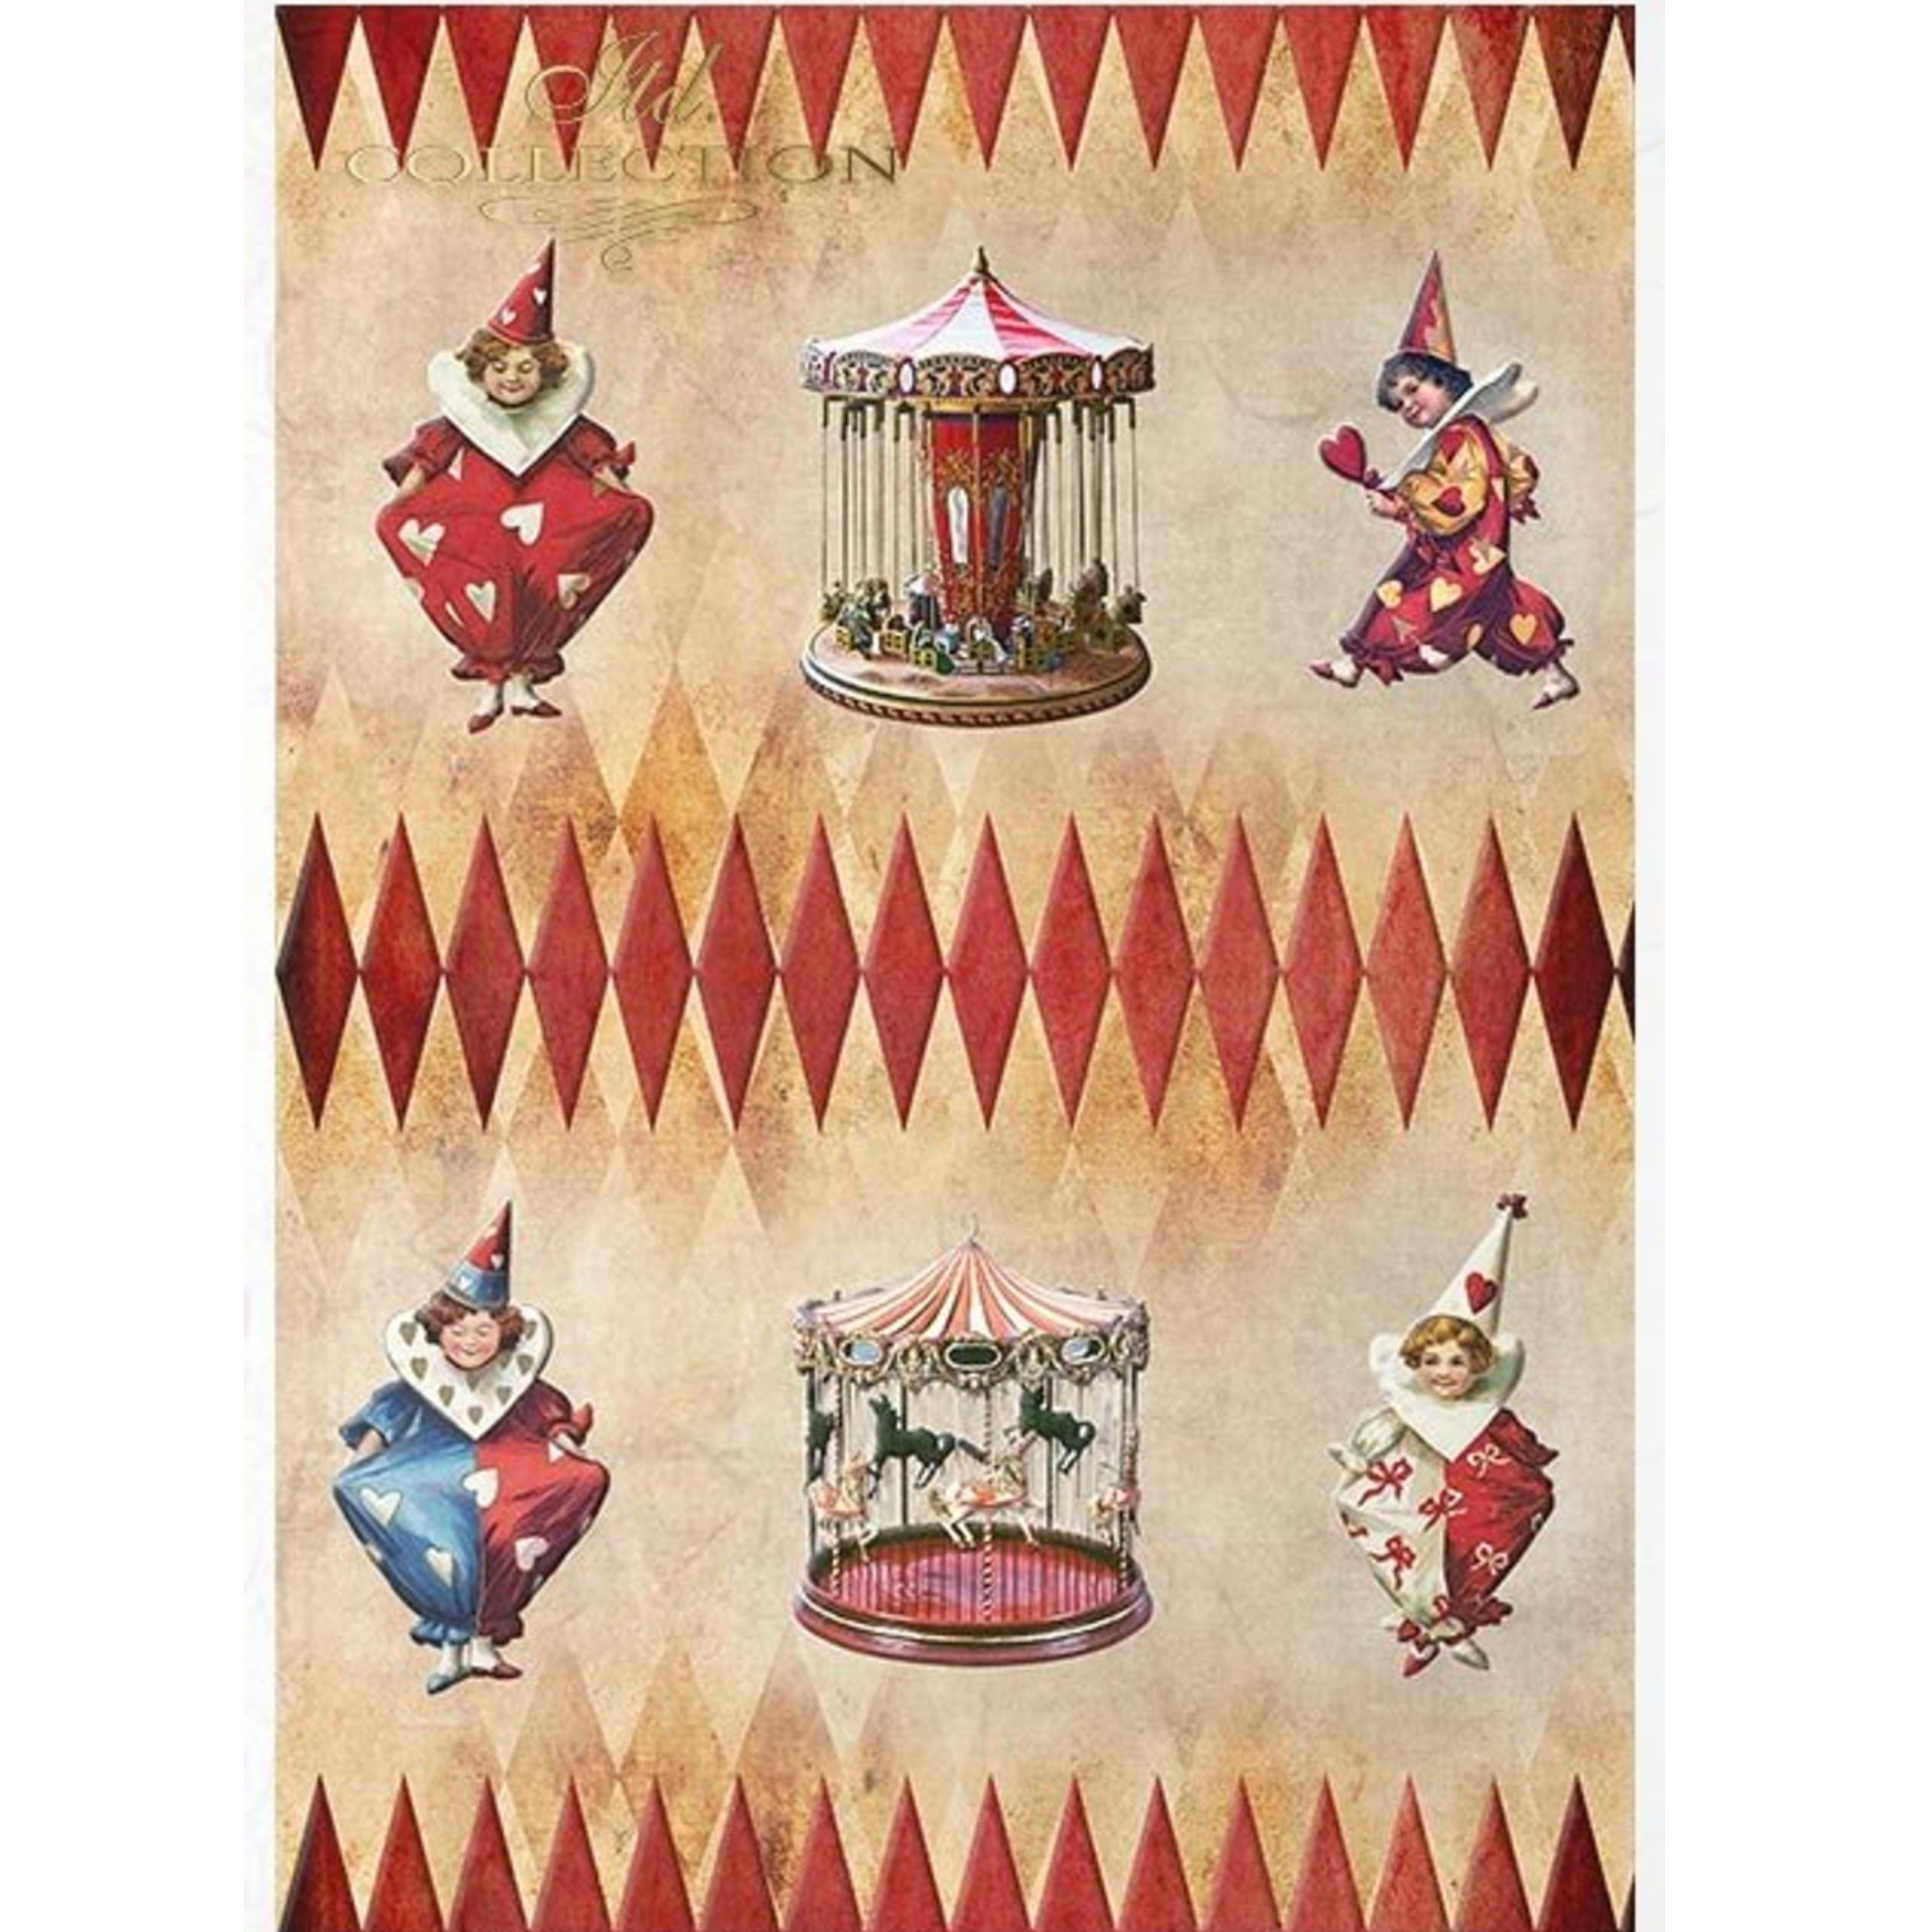 "Carnival-Pierrot In Love" decoupage rice paper A4 set available at Milton's Daughter. Page 3 of 11 page set.